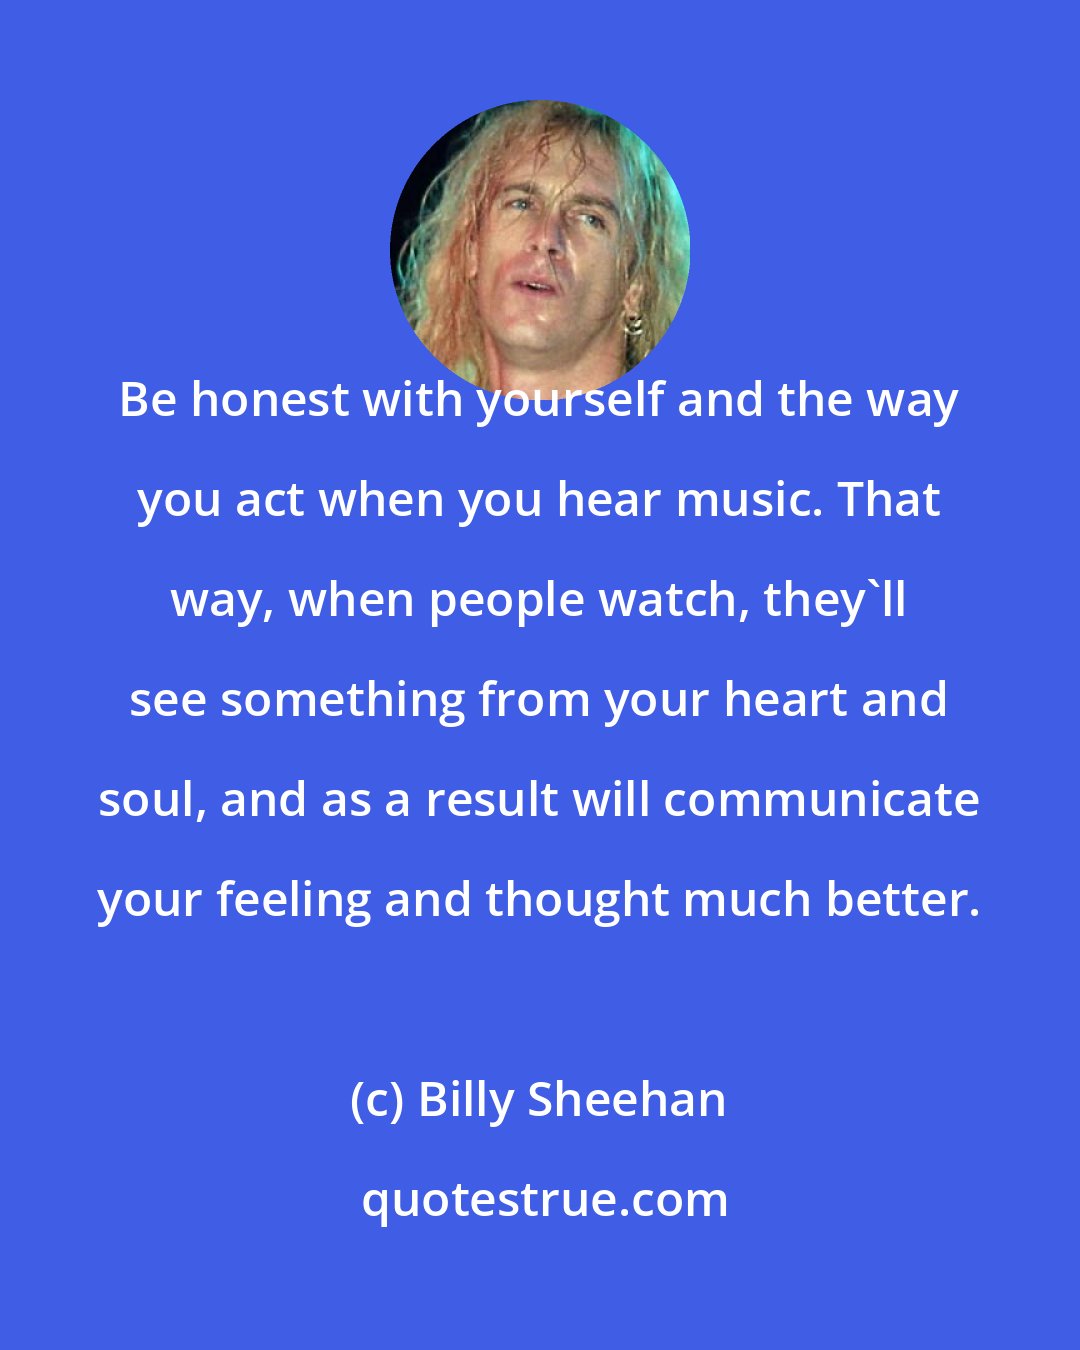 Billy Sheehan: Be honest with yourself and the way you act when you hear music. That way, when people watch, they'll see something from your heart and soul, and as a result will communicate your feeling and thought much better.